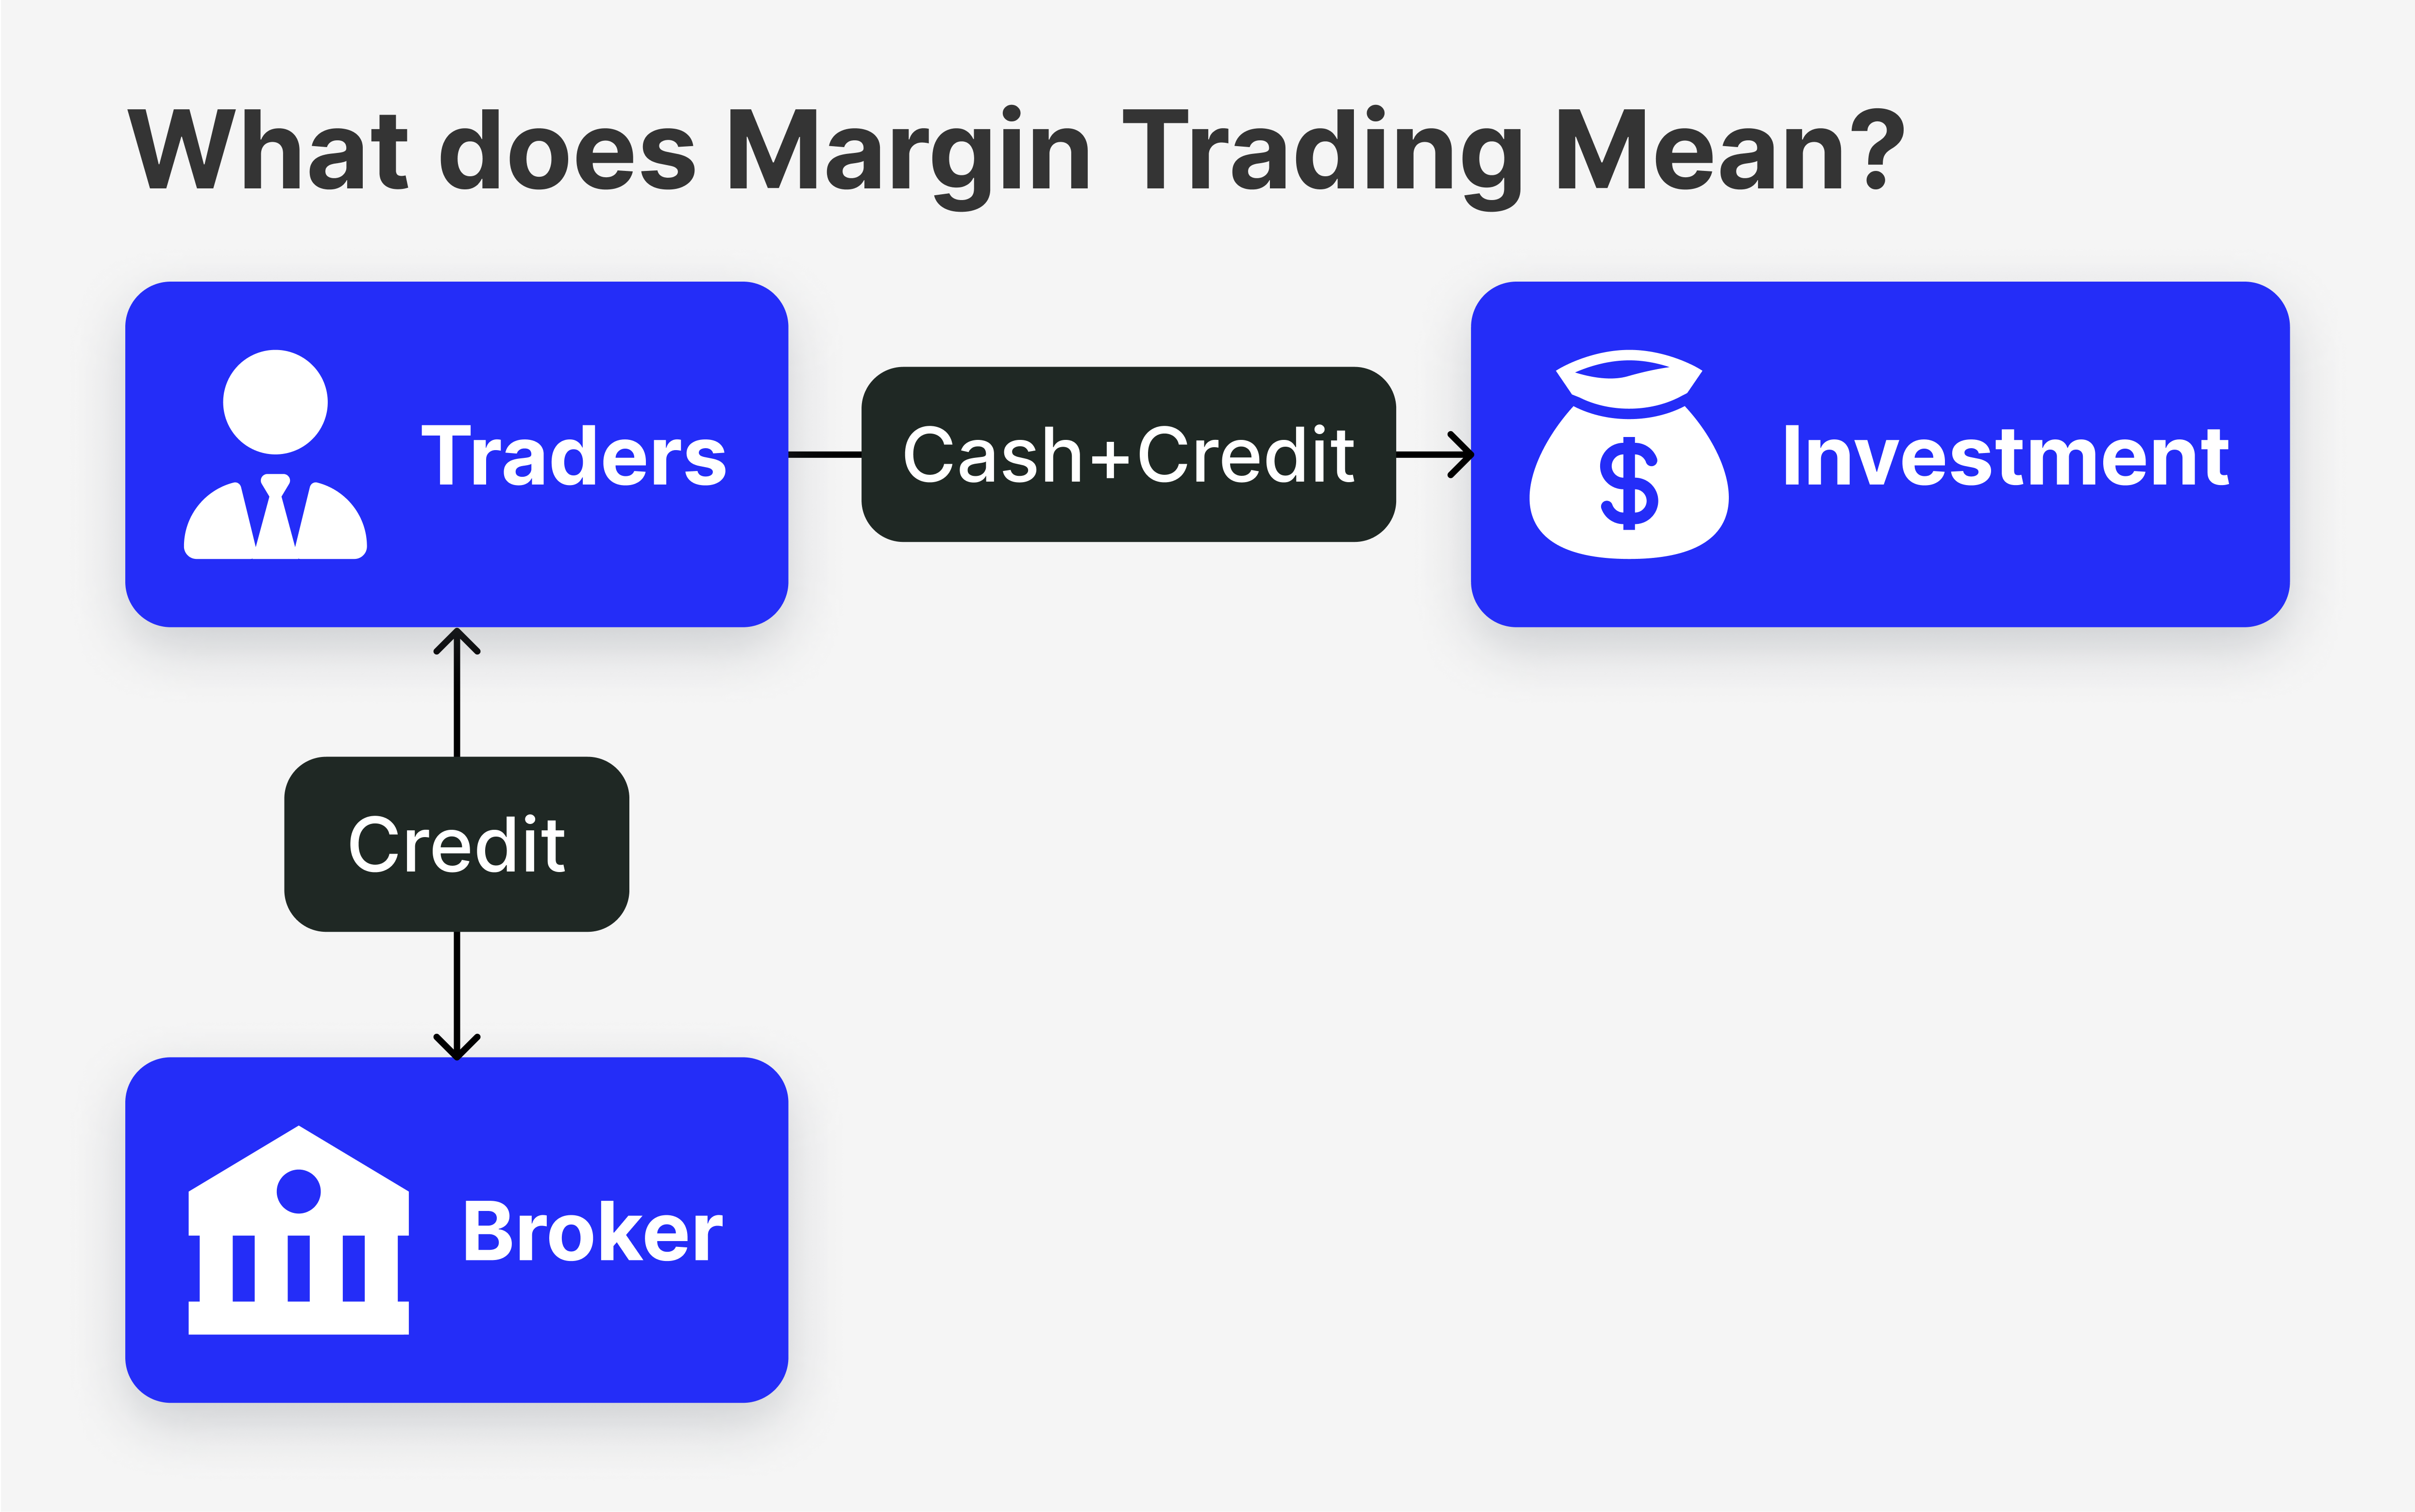 What does Margin Trading Mean?